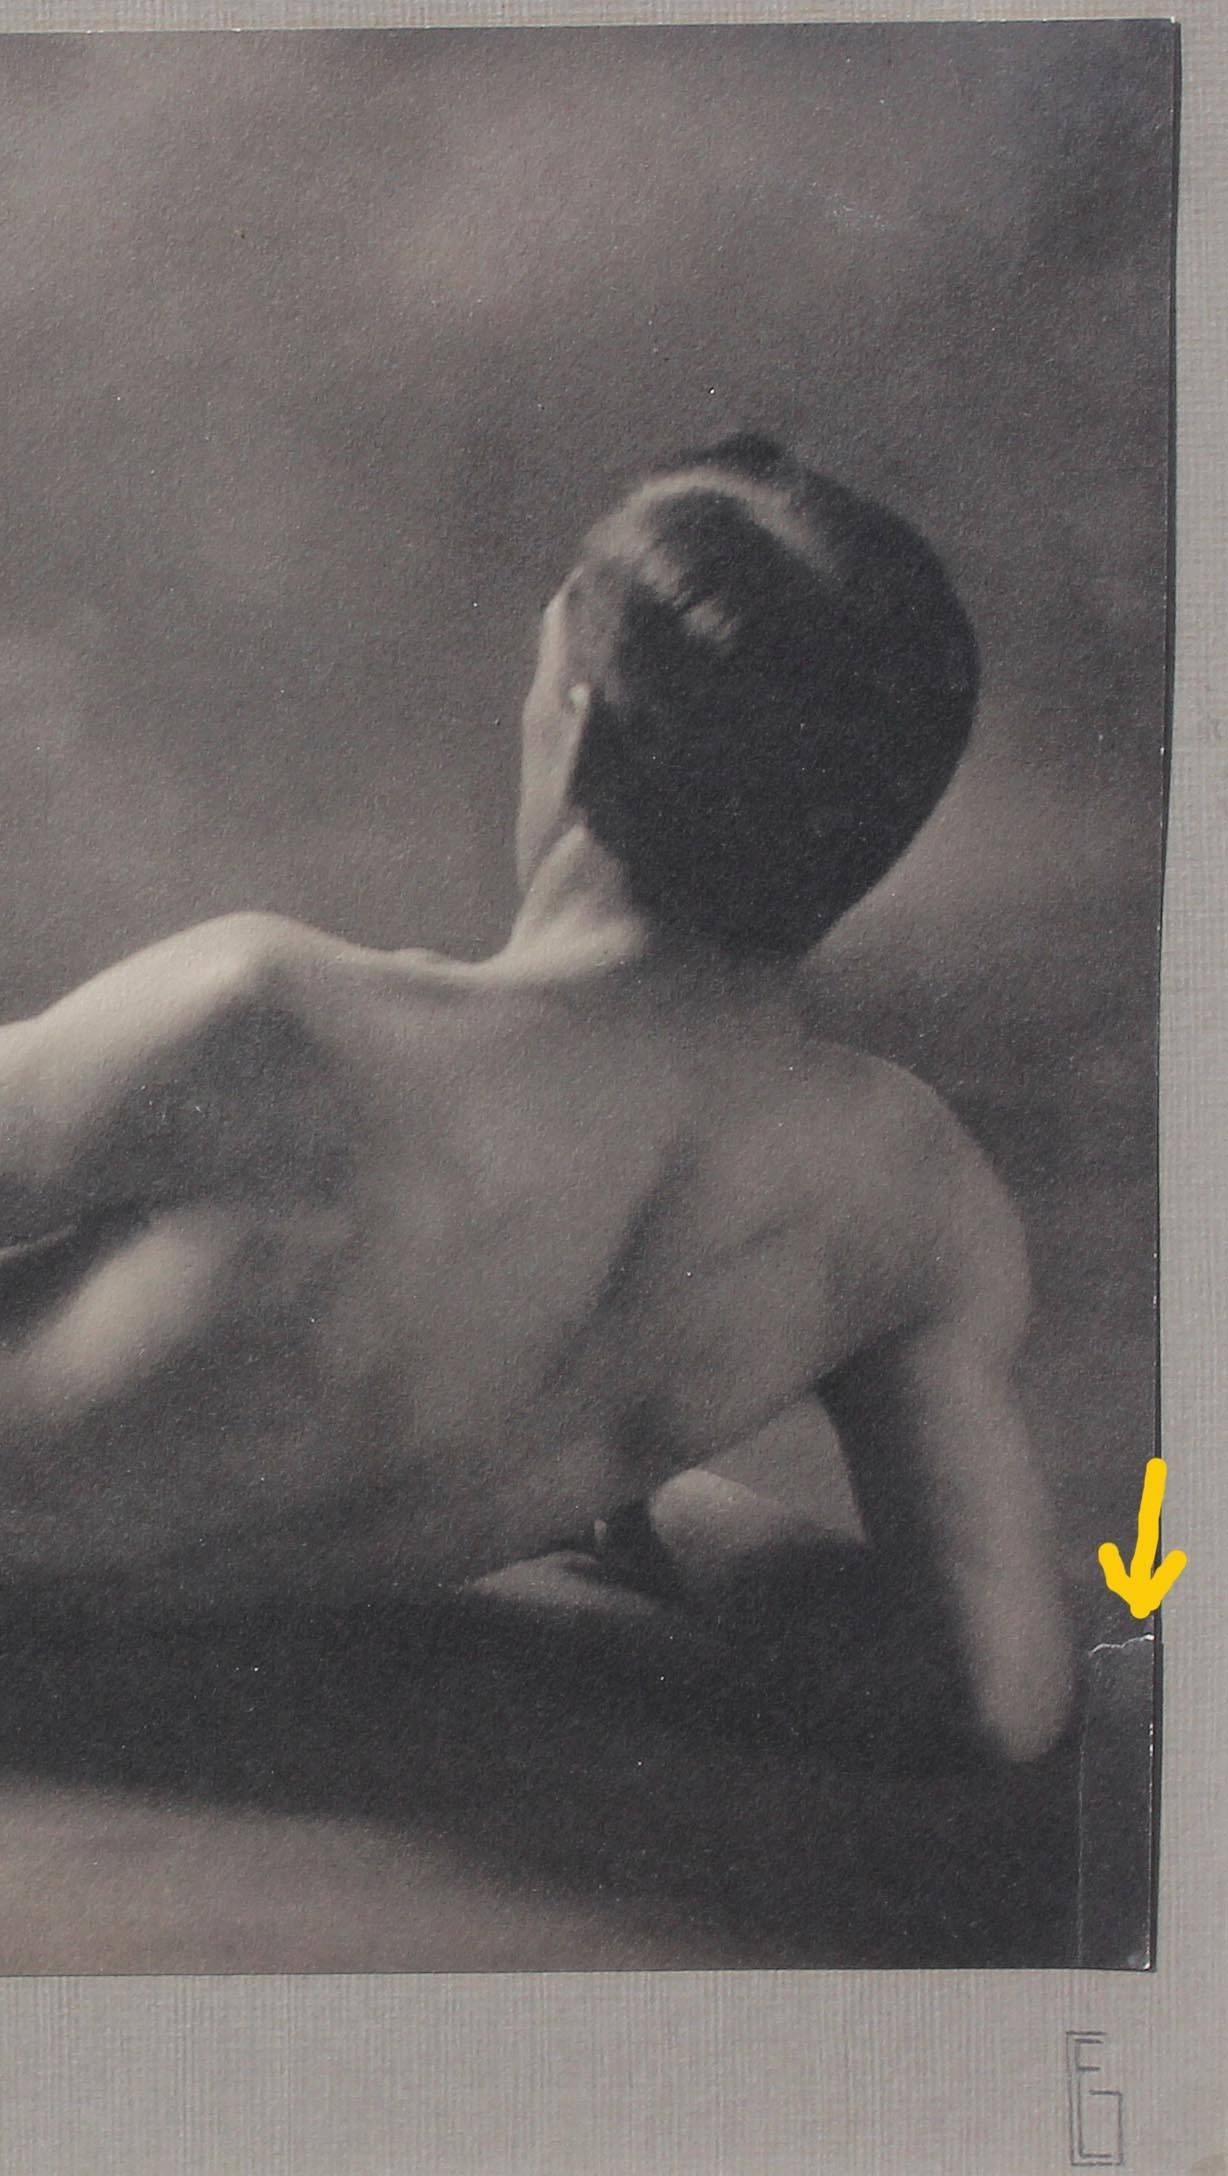 Modern Pictorialist Nude Photography